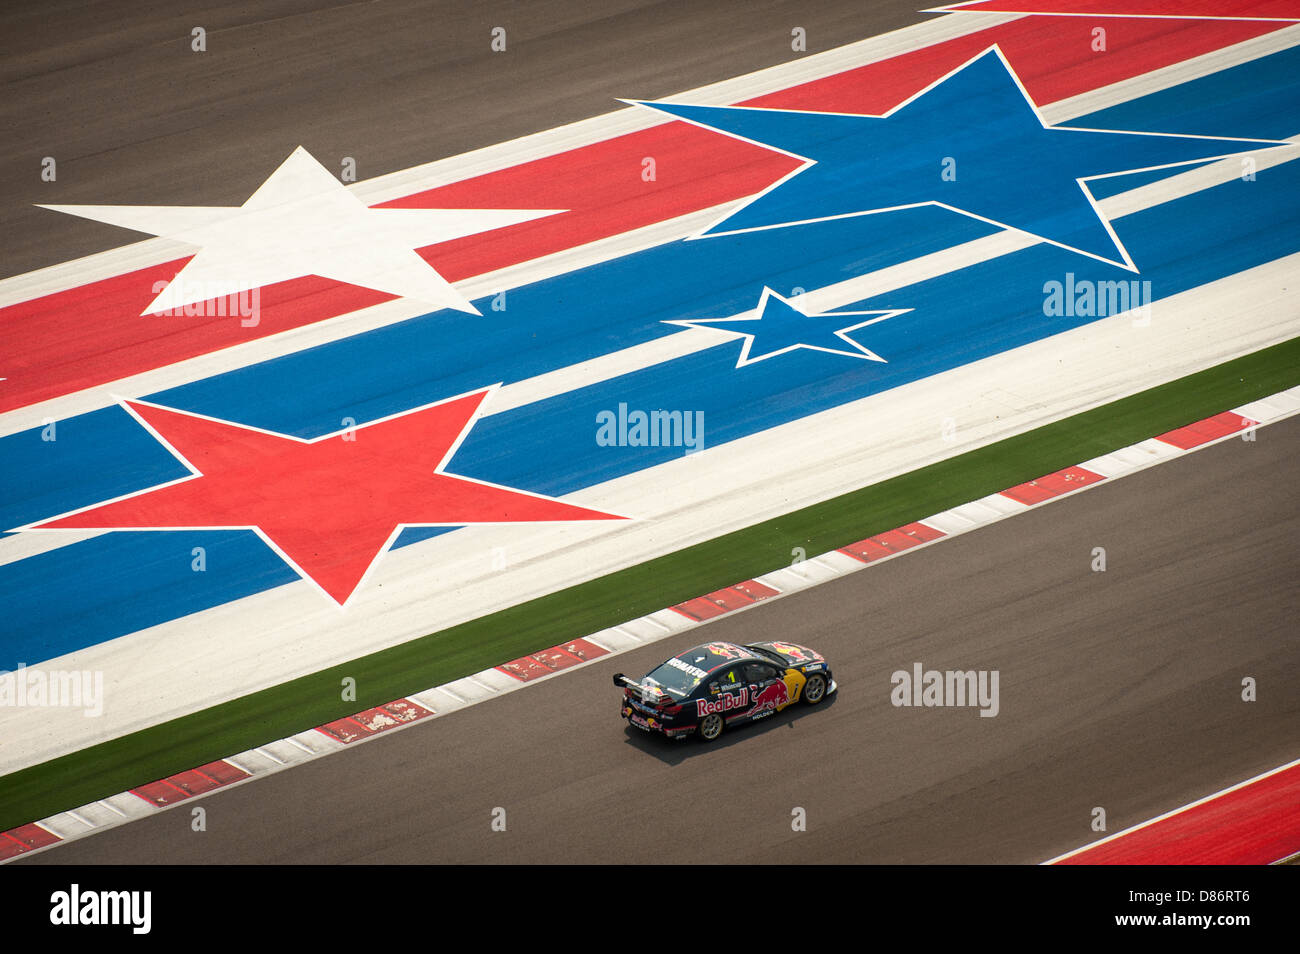 Jamie Whincup of Red Bull heading for victory in the first 2013 V8 Supercars 'Austin 400' race at Circuit of the Americas. Stock Photo